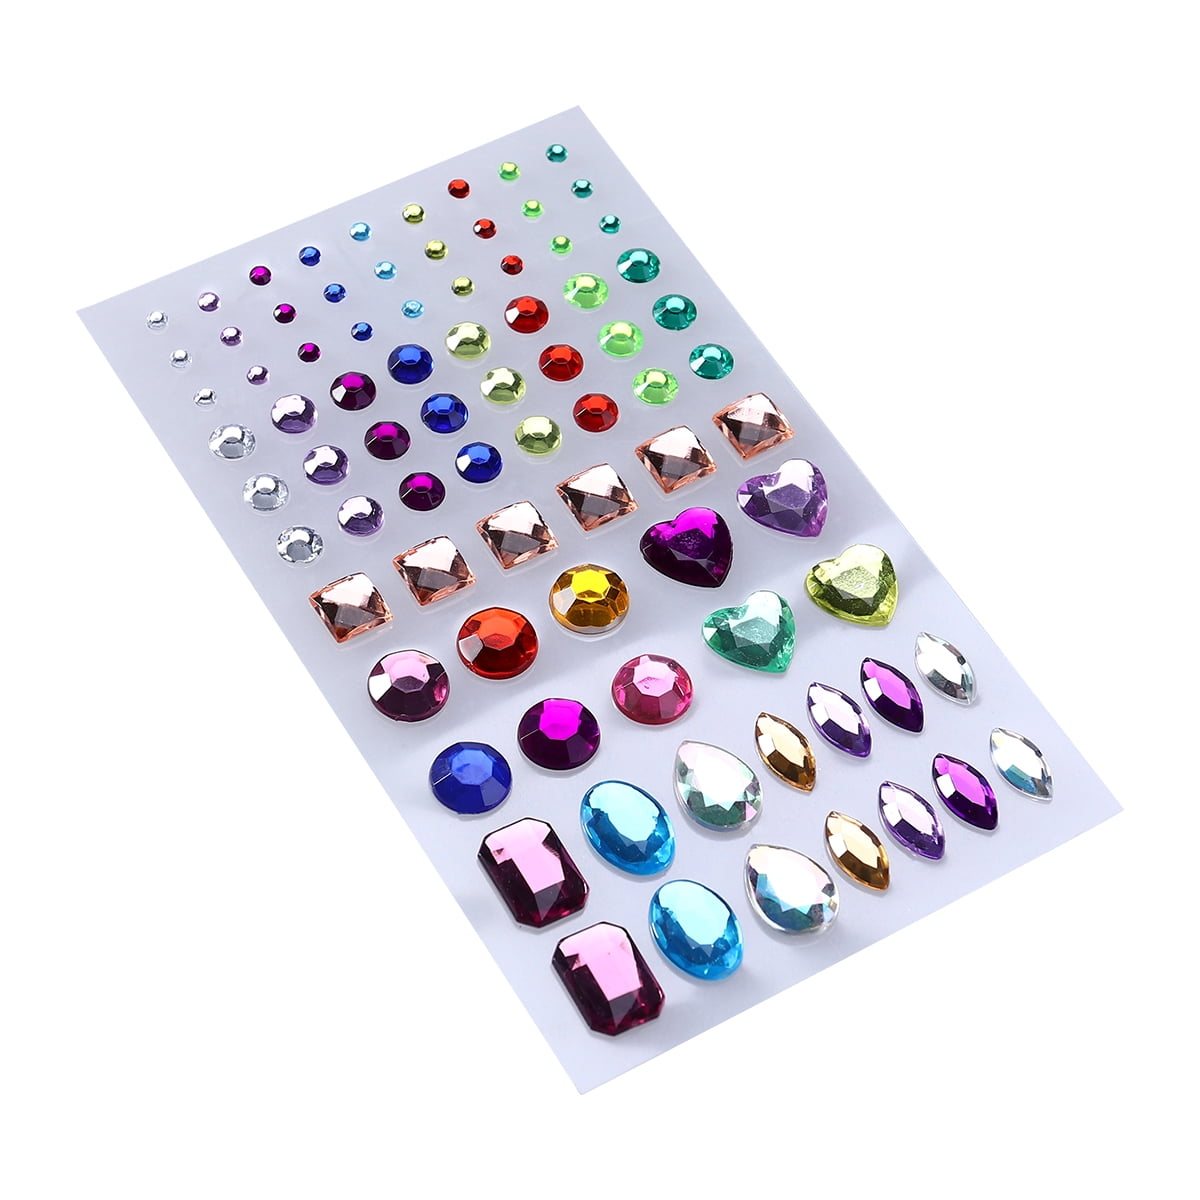 Self-Adhesive Acrylic Crystal Rhinestone Jewels Gems Sticker Sheets Assorted Colors Various Shapes (Multicolor Type 1)